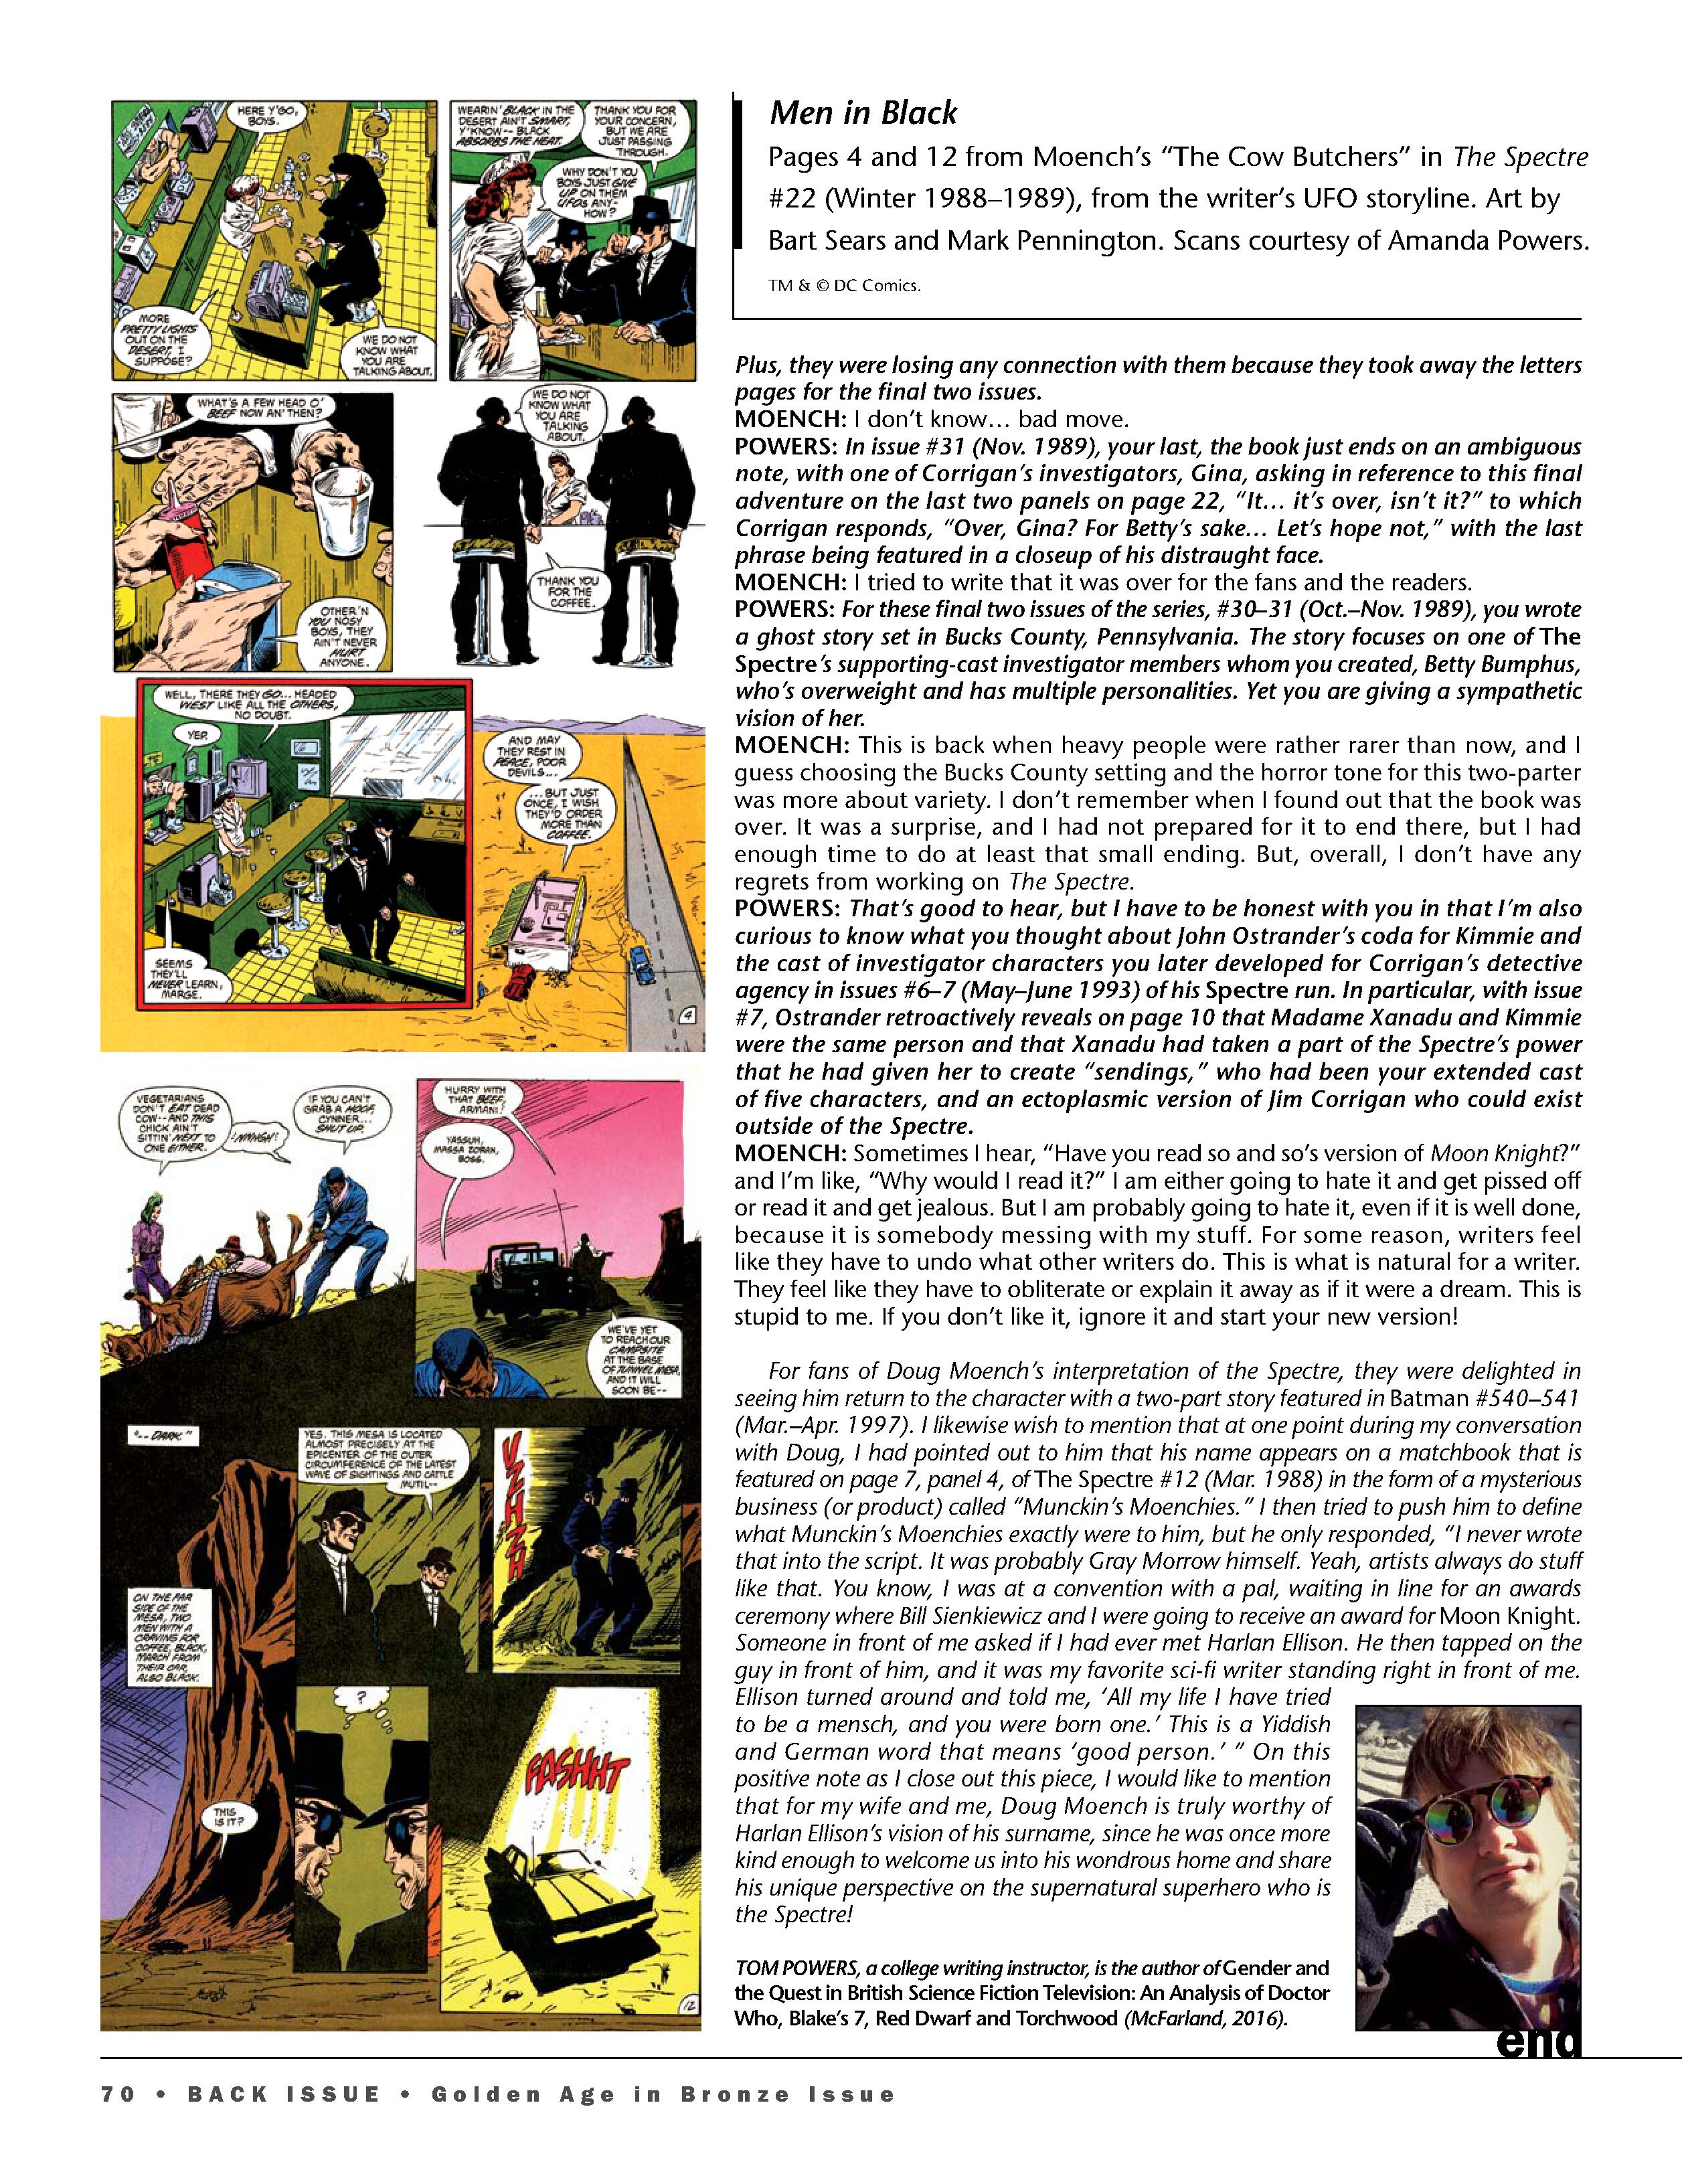 Read online Back Issue comic -  Issue #106 - 72